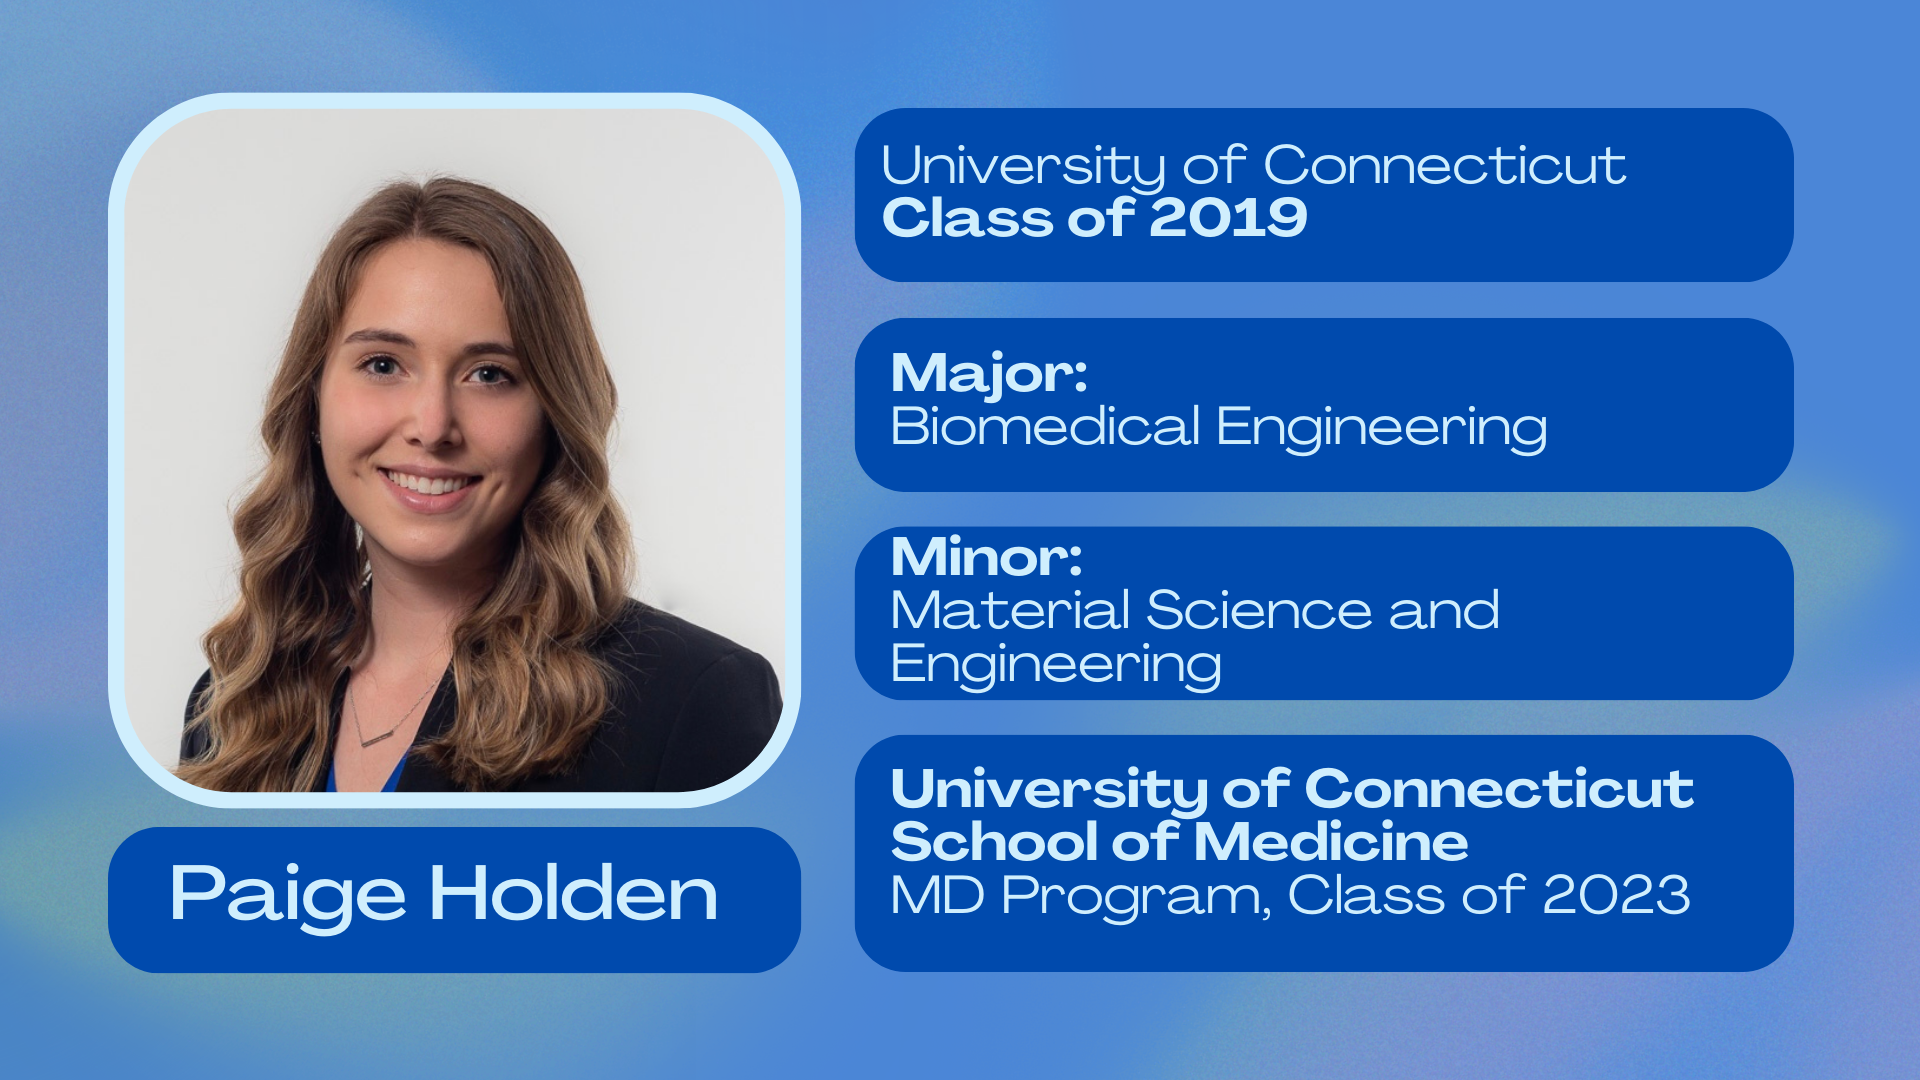 Paige Holden; University of Connecticut class of 2019; Major: Biomedical Engineering; Minor: Material Science and Engineering; University of Connecticut School of Medicine, MD Program class of 2023